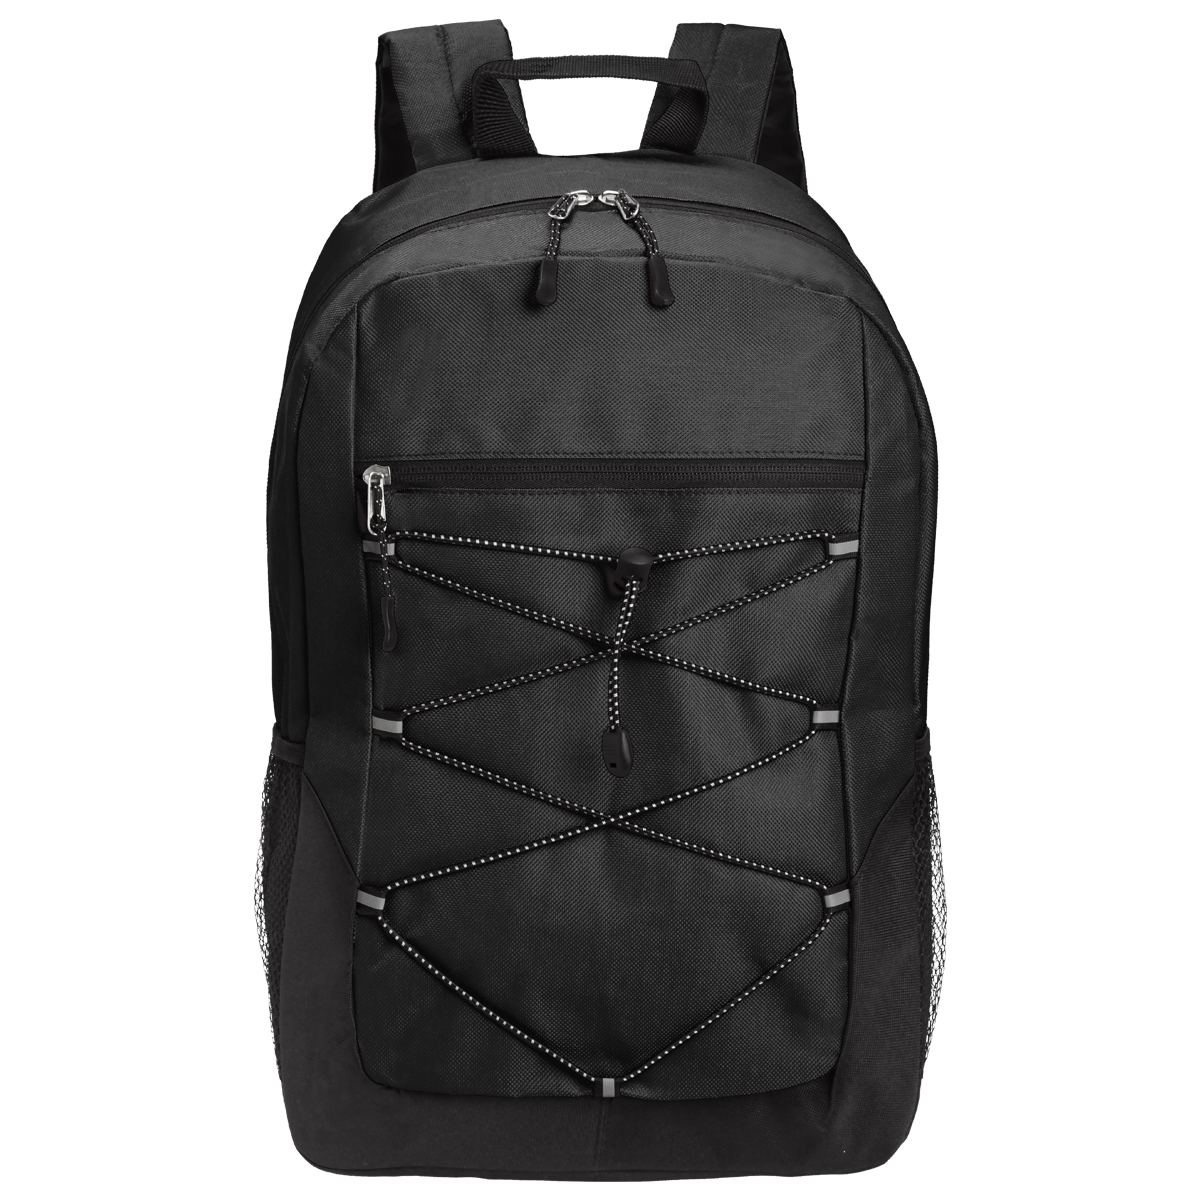 Lendross Backpack Product Image